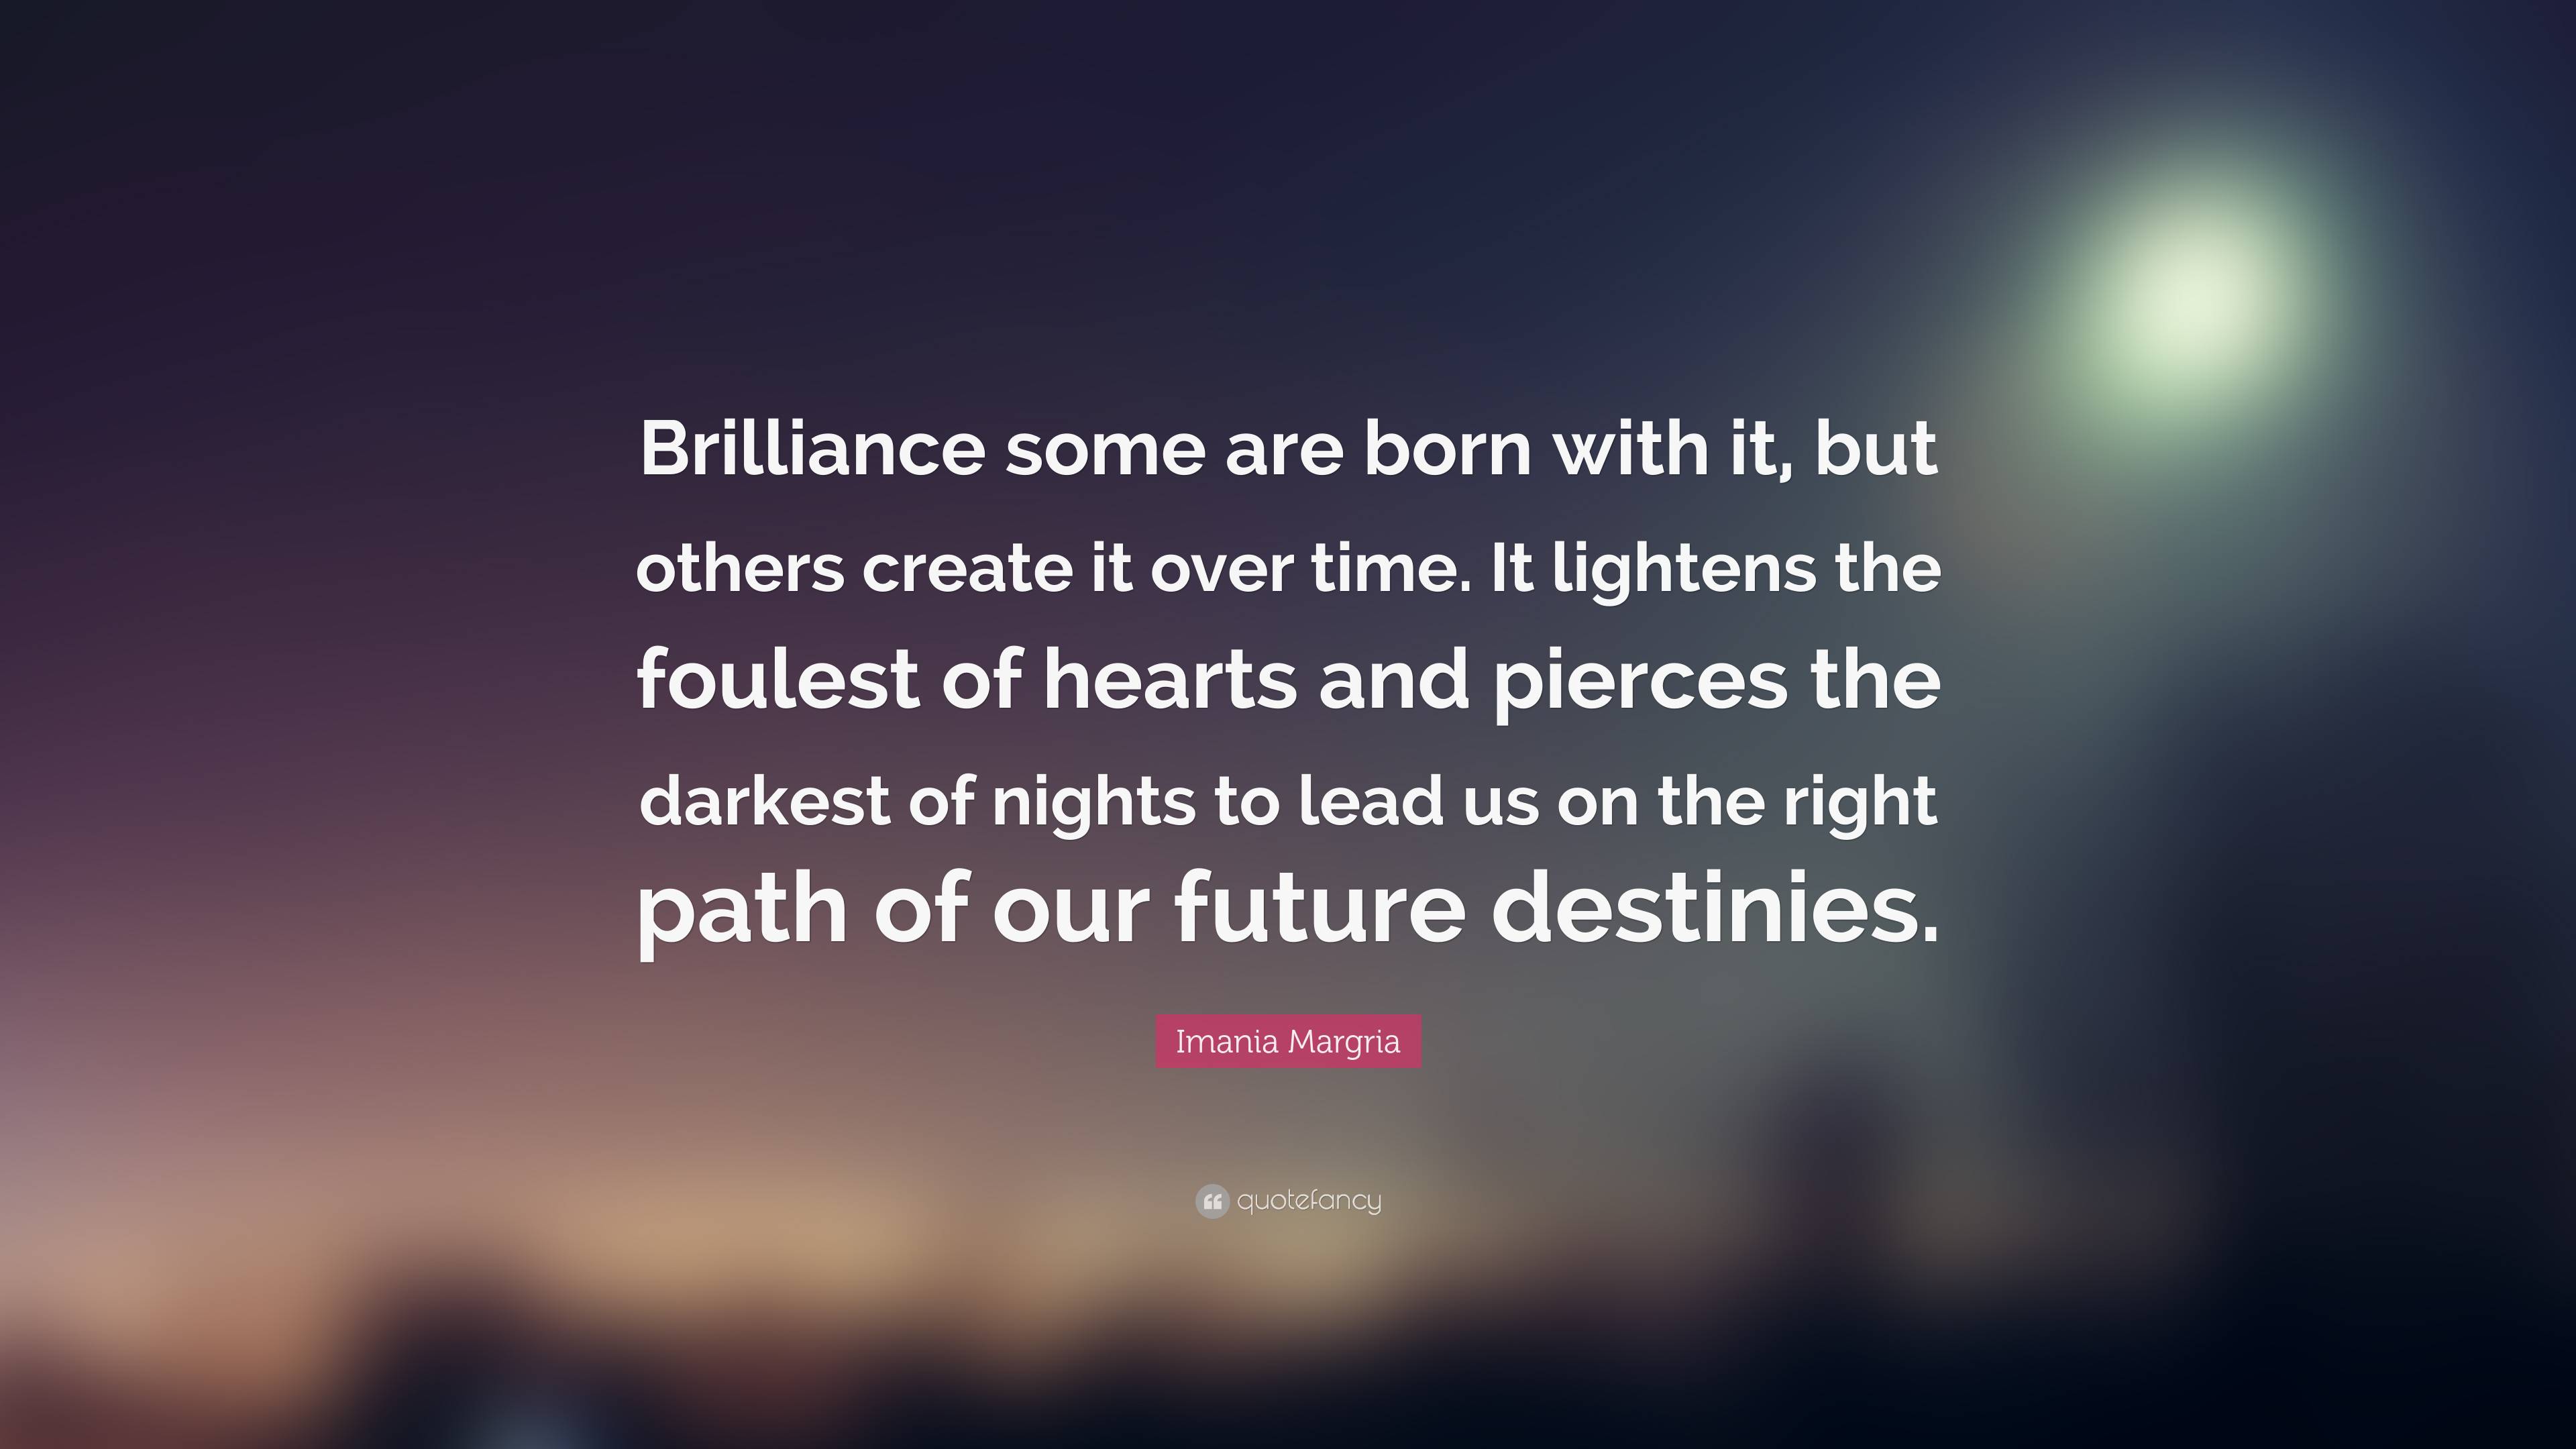 Imania Margria Quote: “Brilliance some are born with it, but others ...